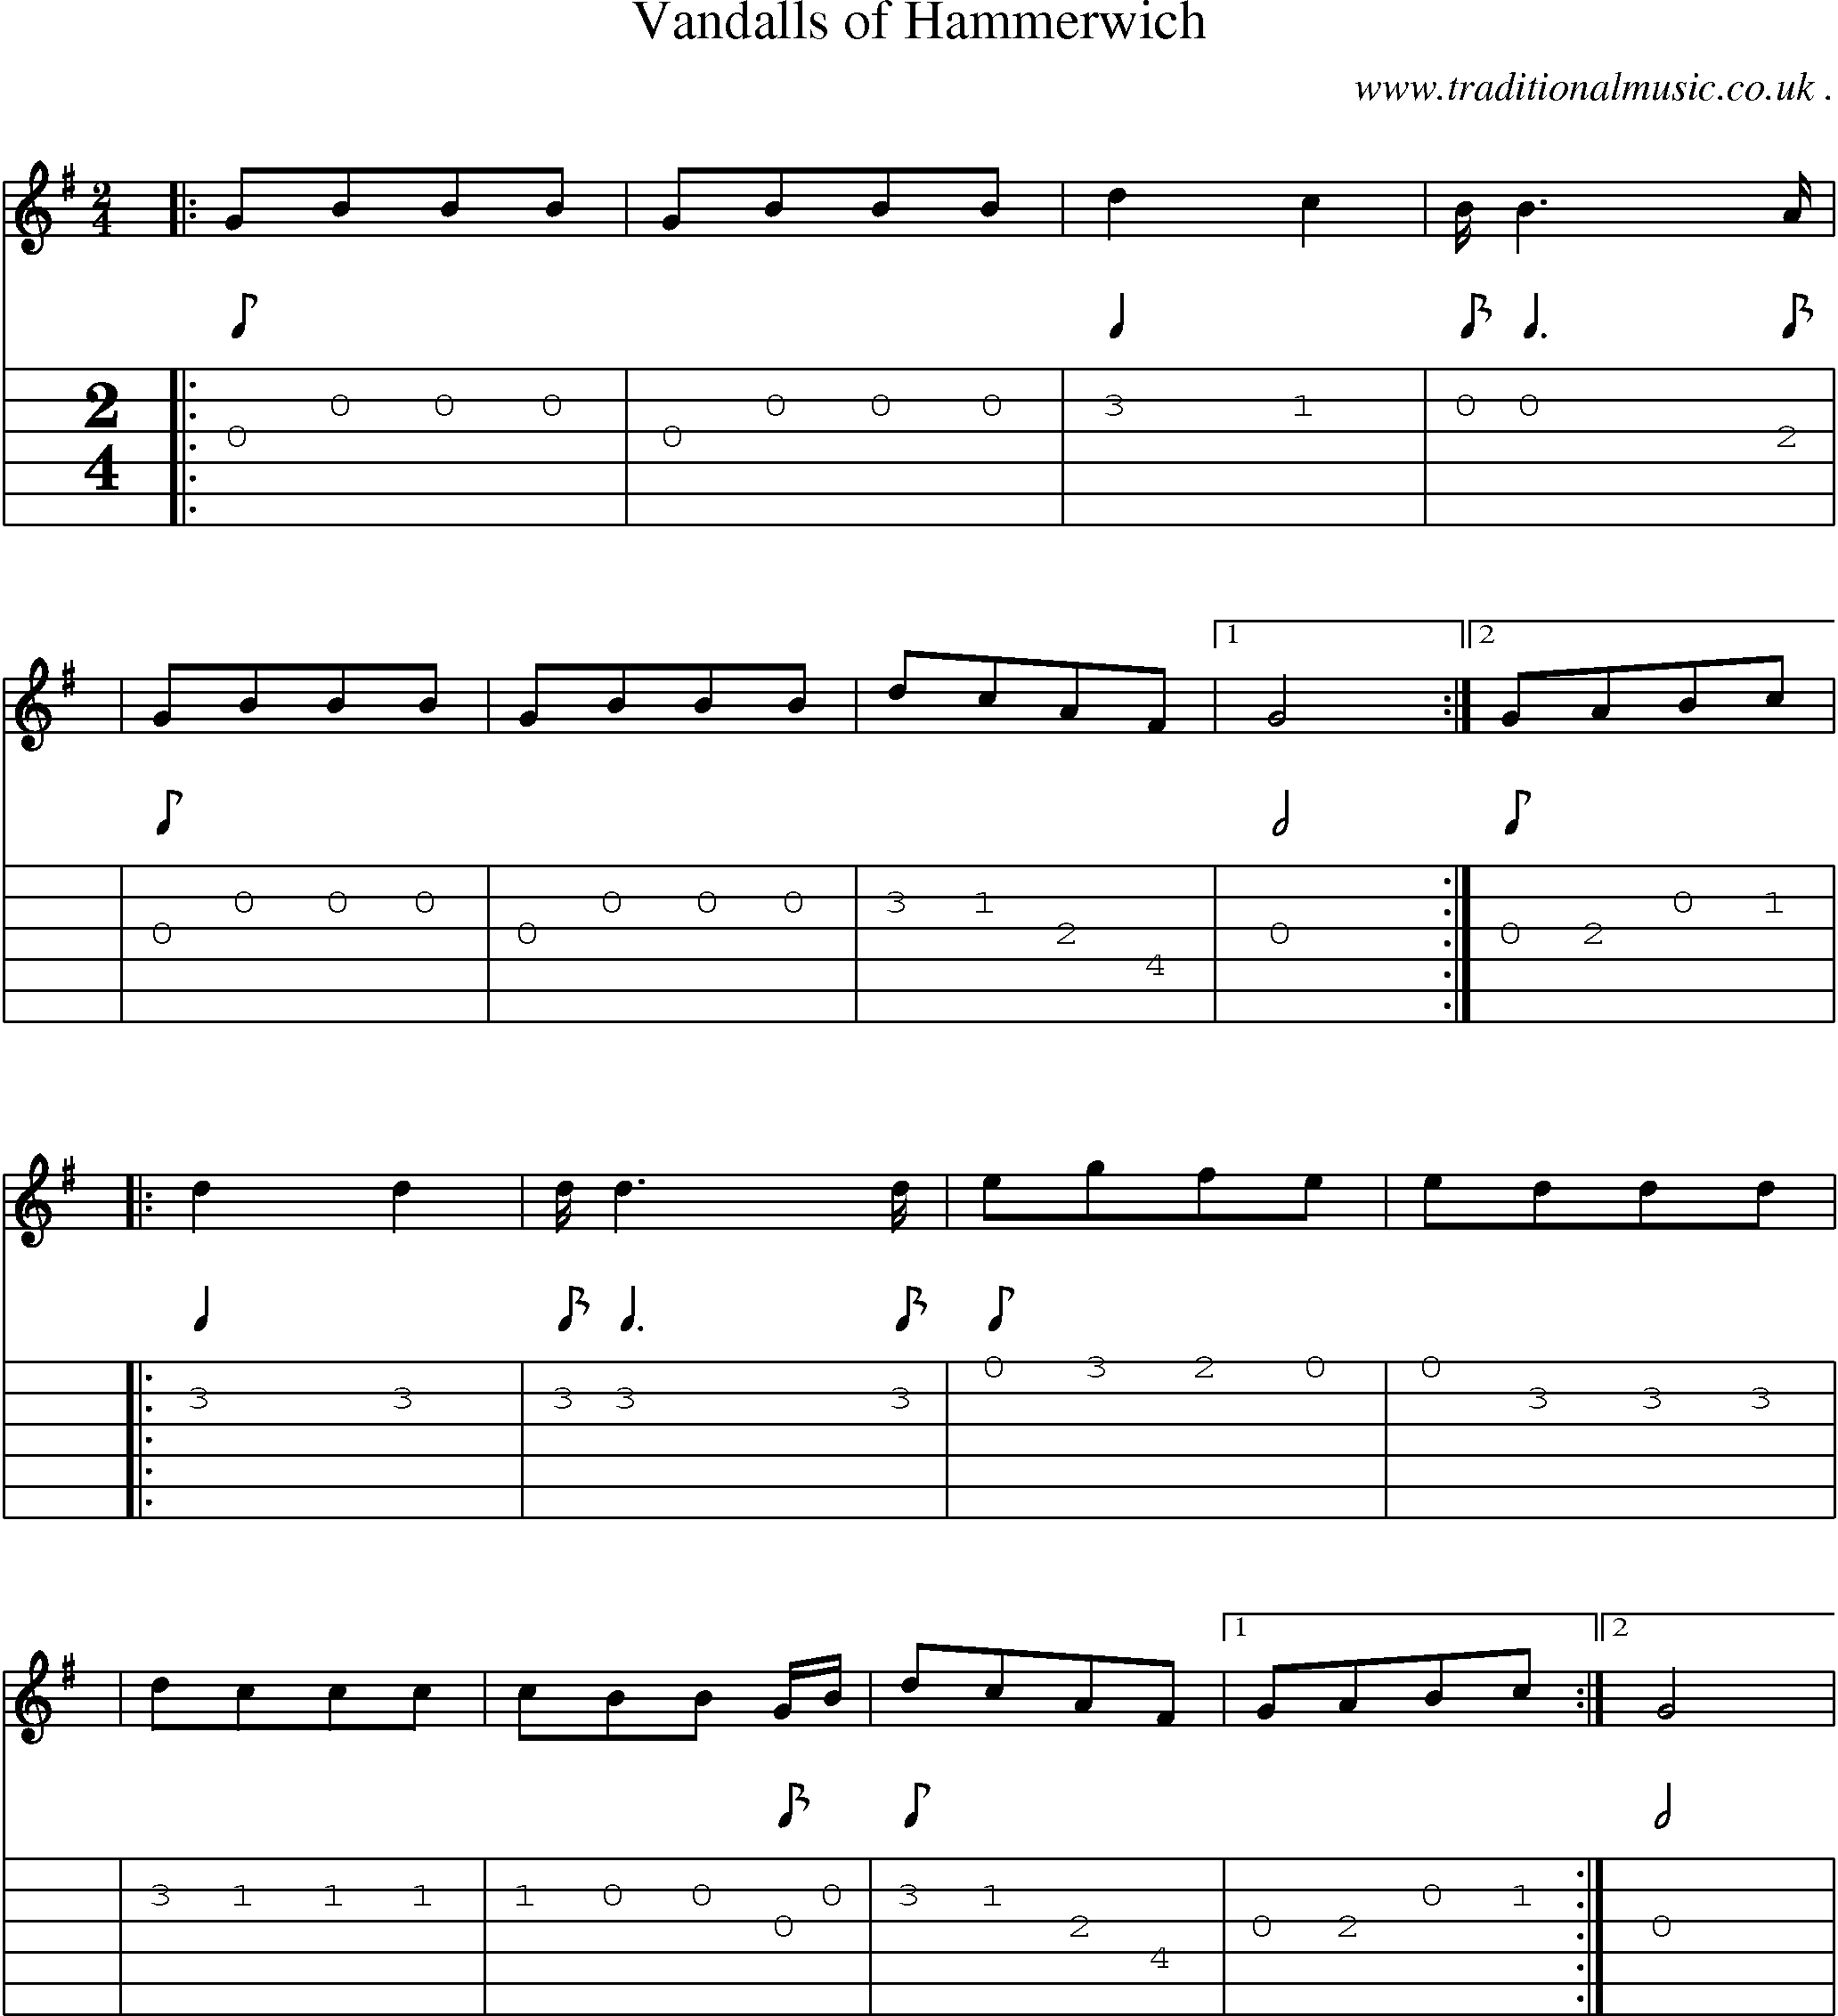 Sheet-Music and Guitar Tabs for Vandalls Of Hammerwich